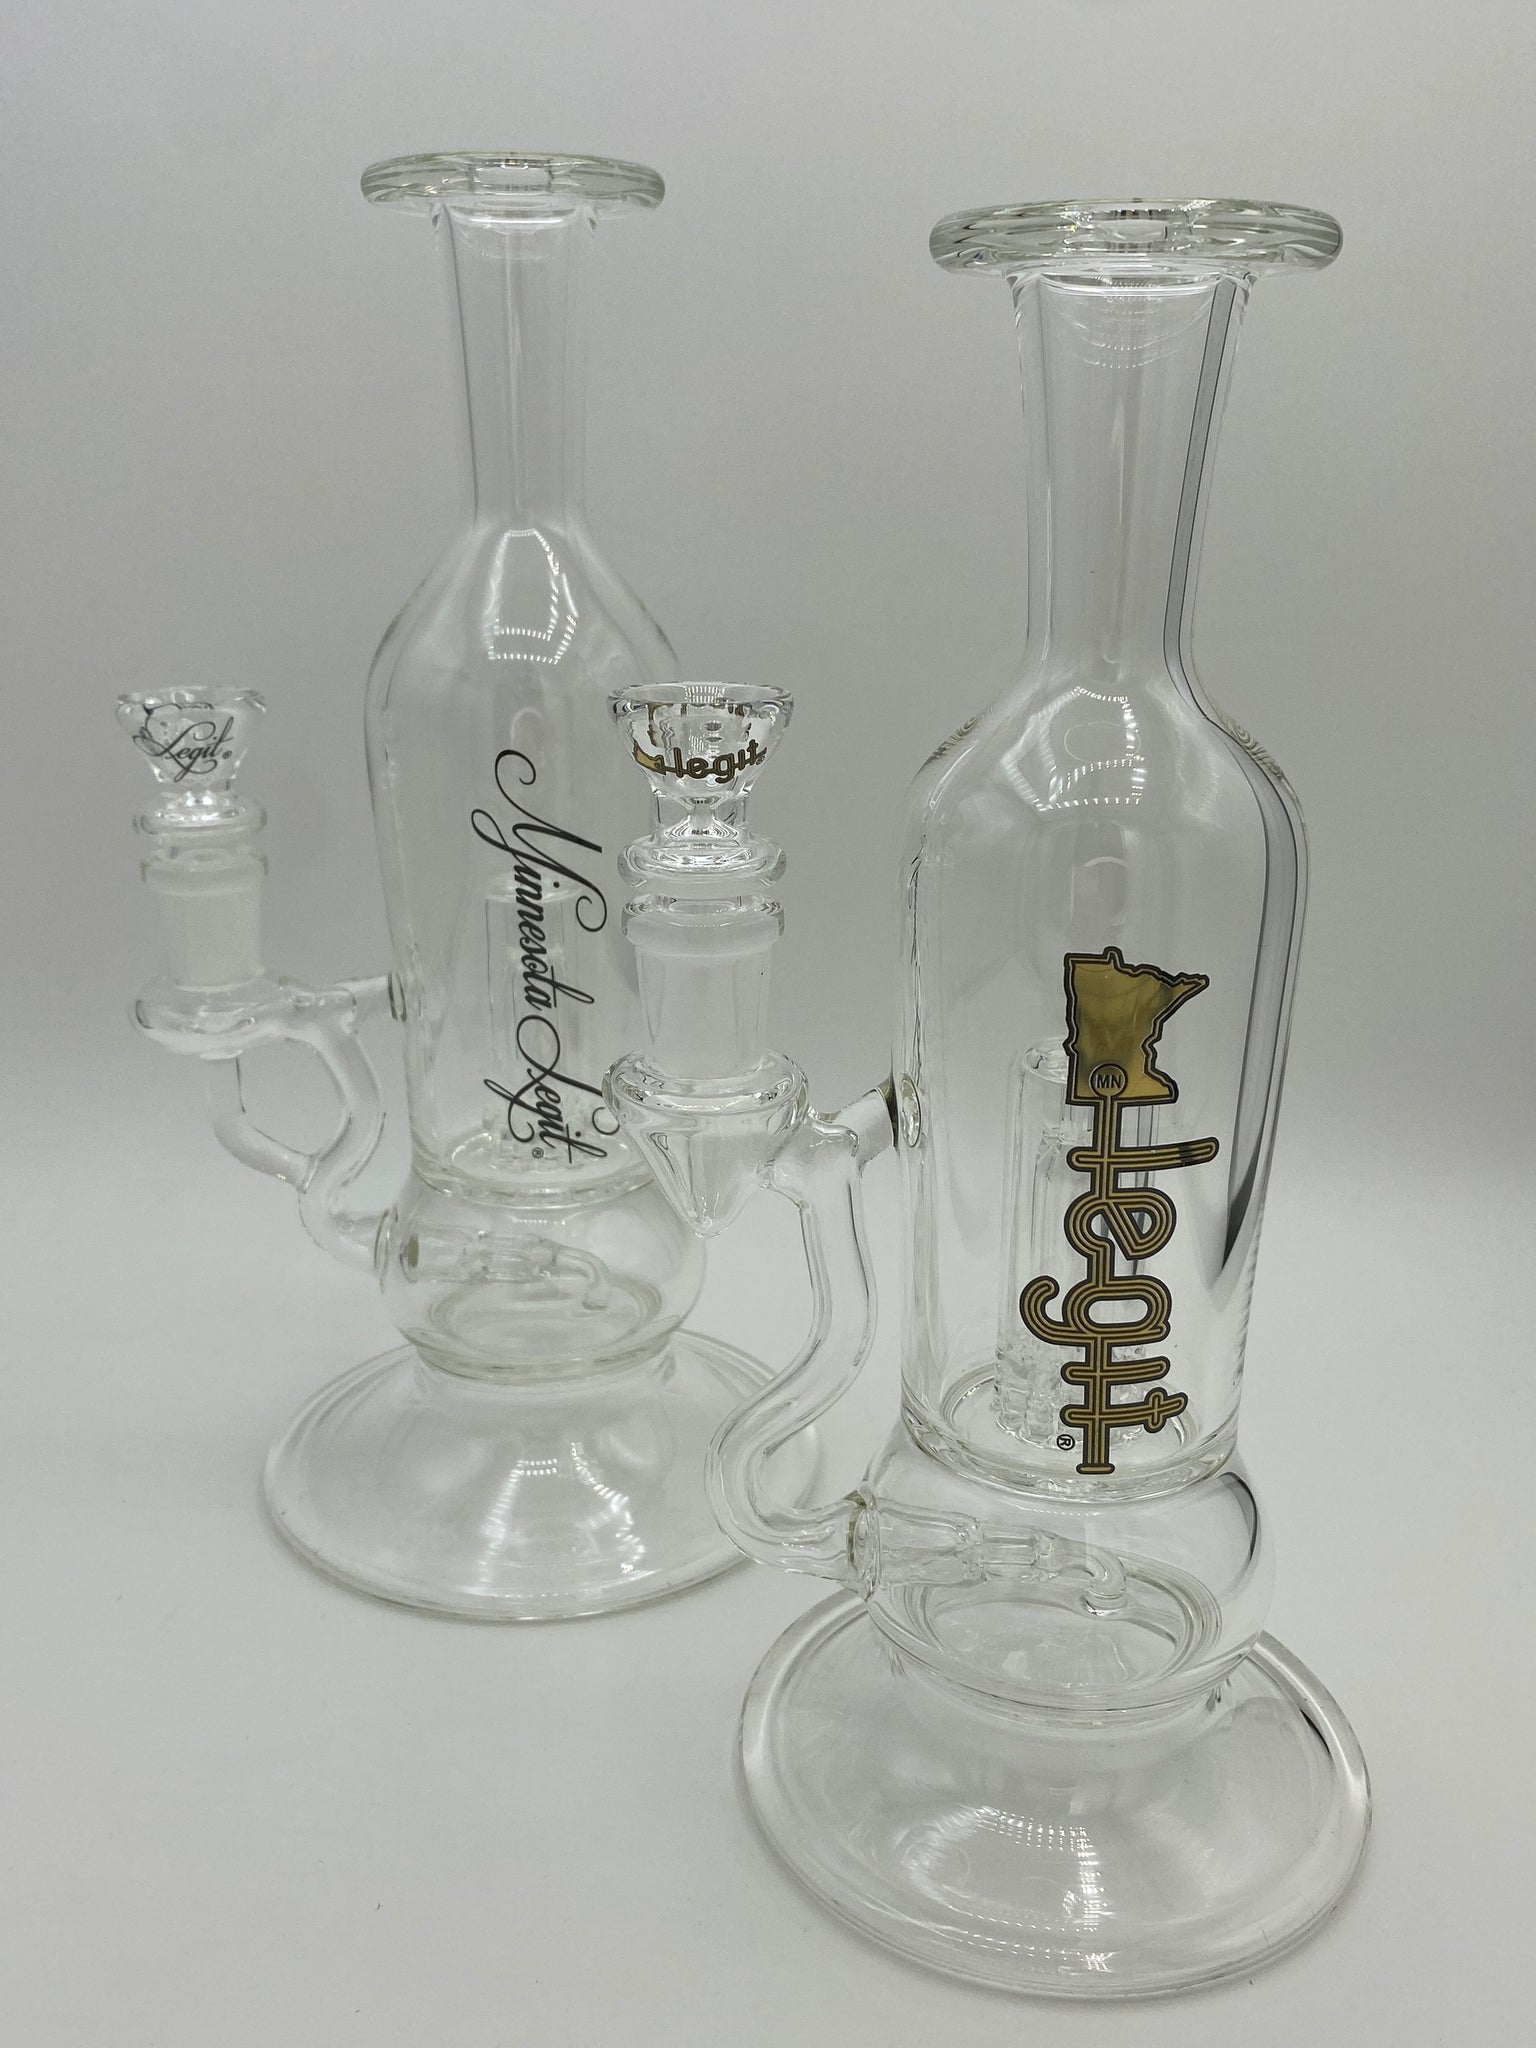 Inline Micro Dome Cage Waterpipe